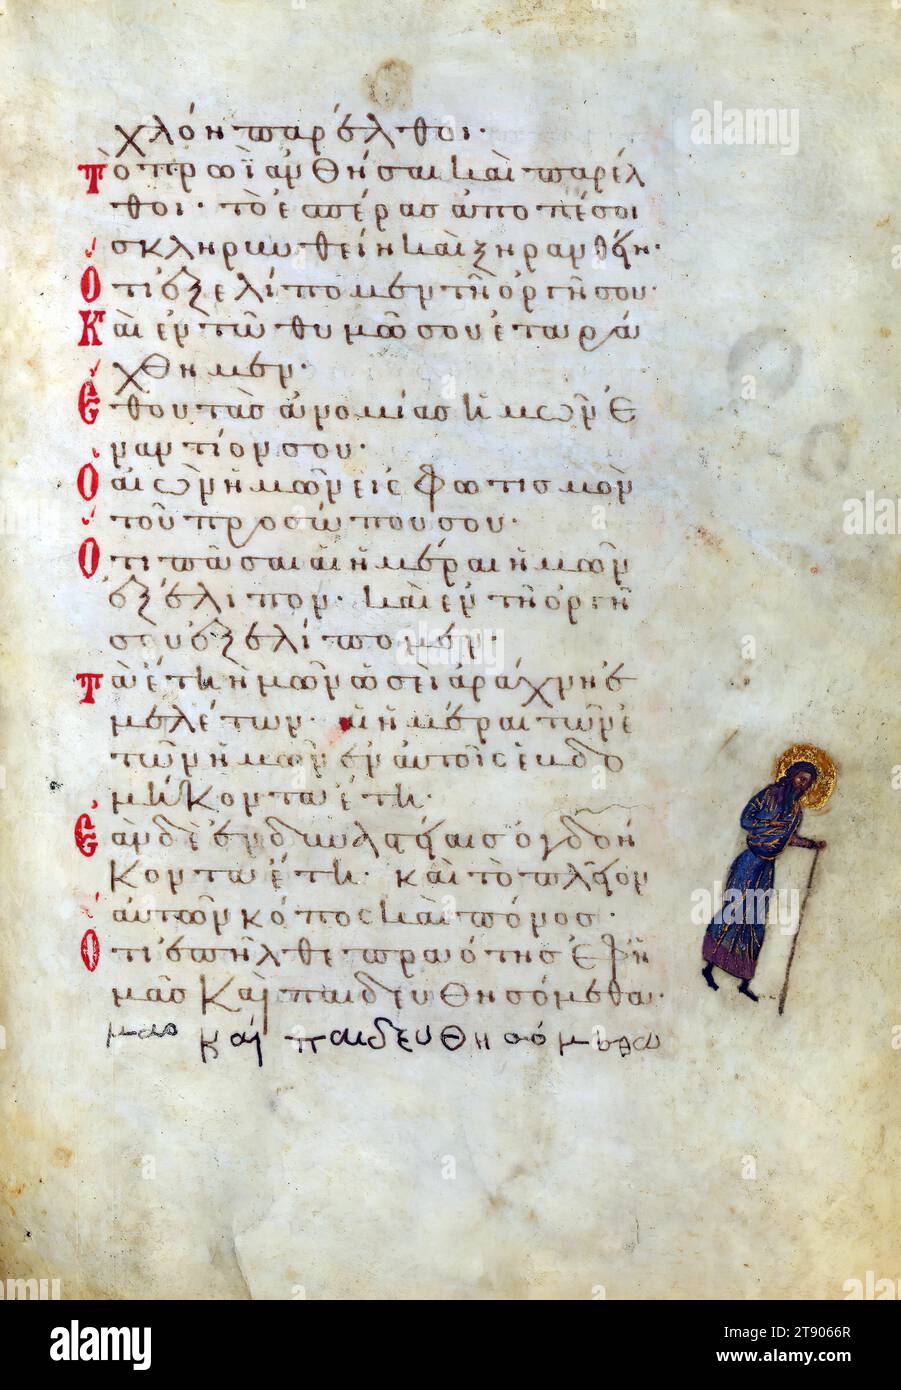 Psalter, An Old Man, This manuscript, illustrated with 155 marginal paintings, is one the few surviving 'marginal psalters,' in which images provide a pictorial commentary on the Biblical text. Other examples include the Khludov Psalter, the Barberini Psalter, the Theodore Psalter, and a Cyrillic psalter made in Kiev Stock Photo